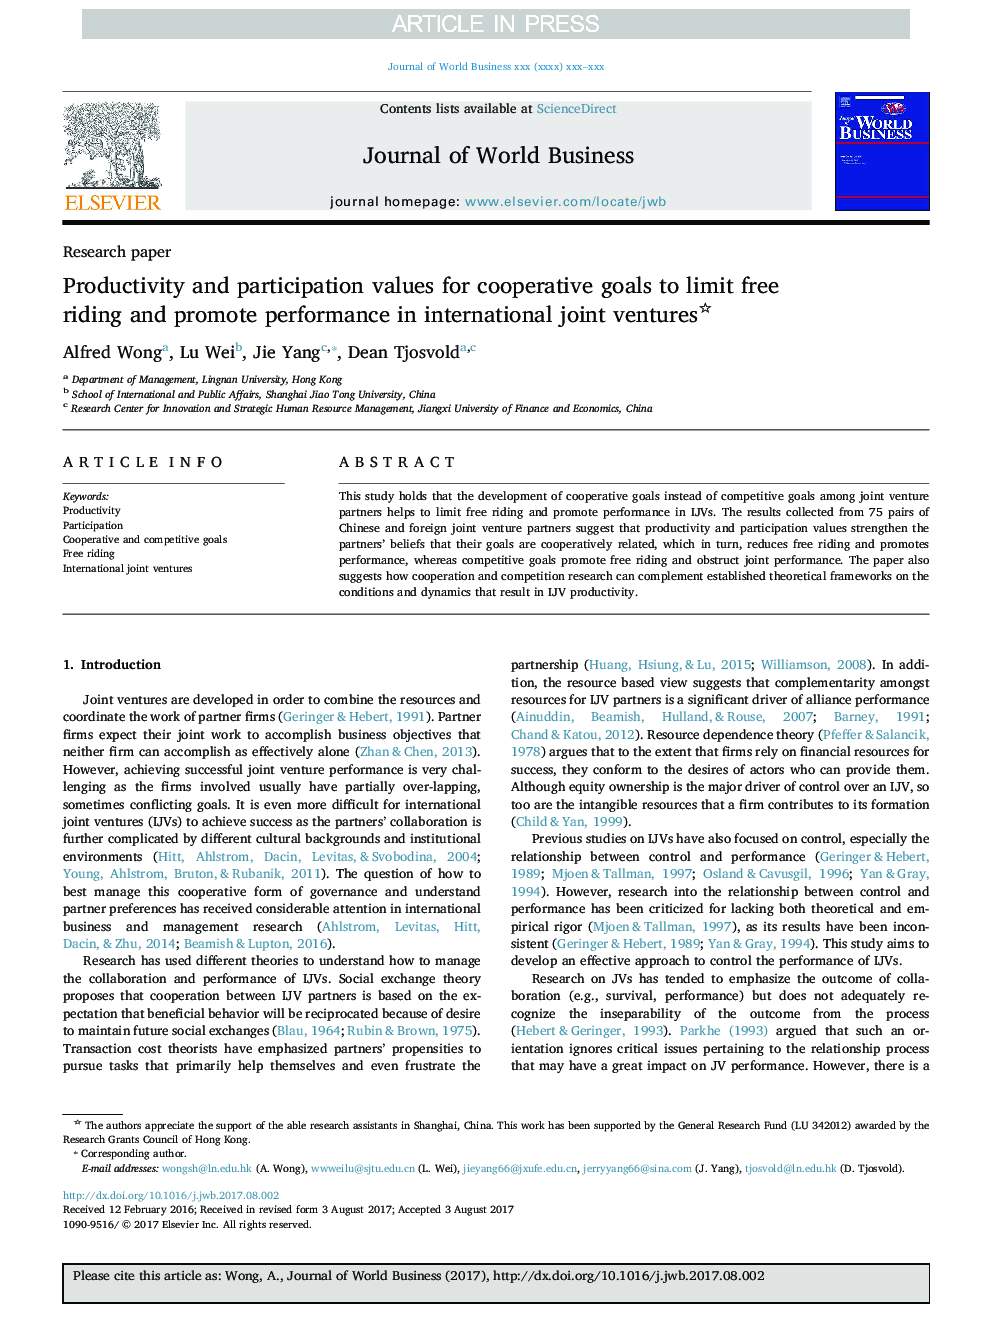 Productivity and participation values for cooperative goals to limit free riding and promote performance in international joint ventures